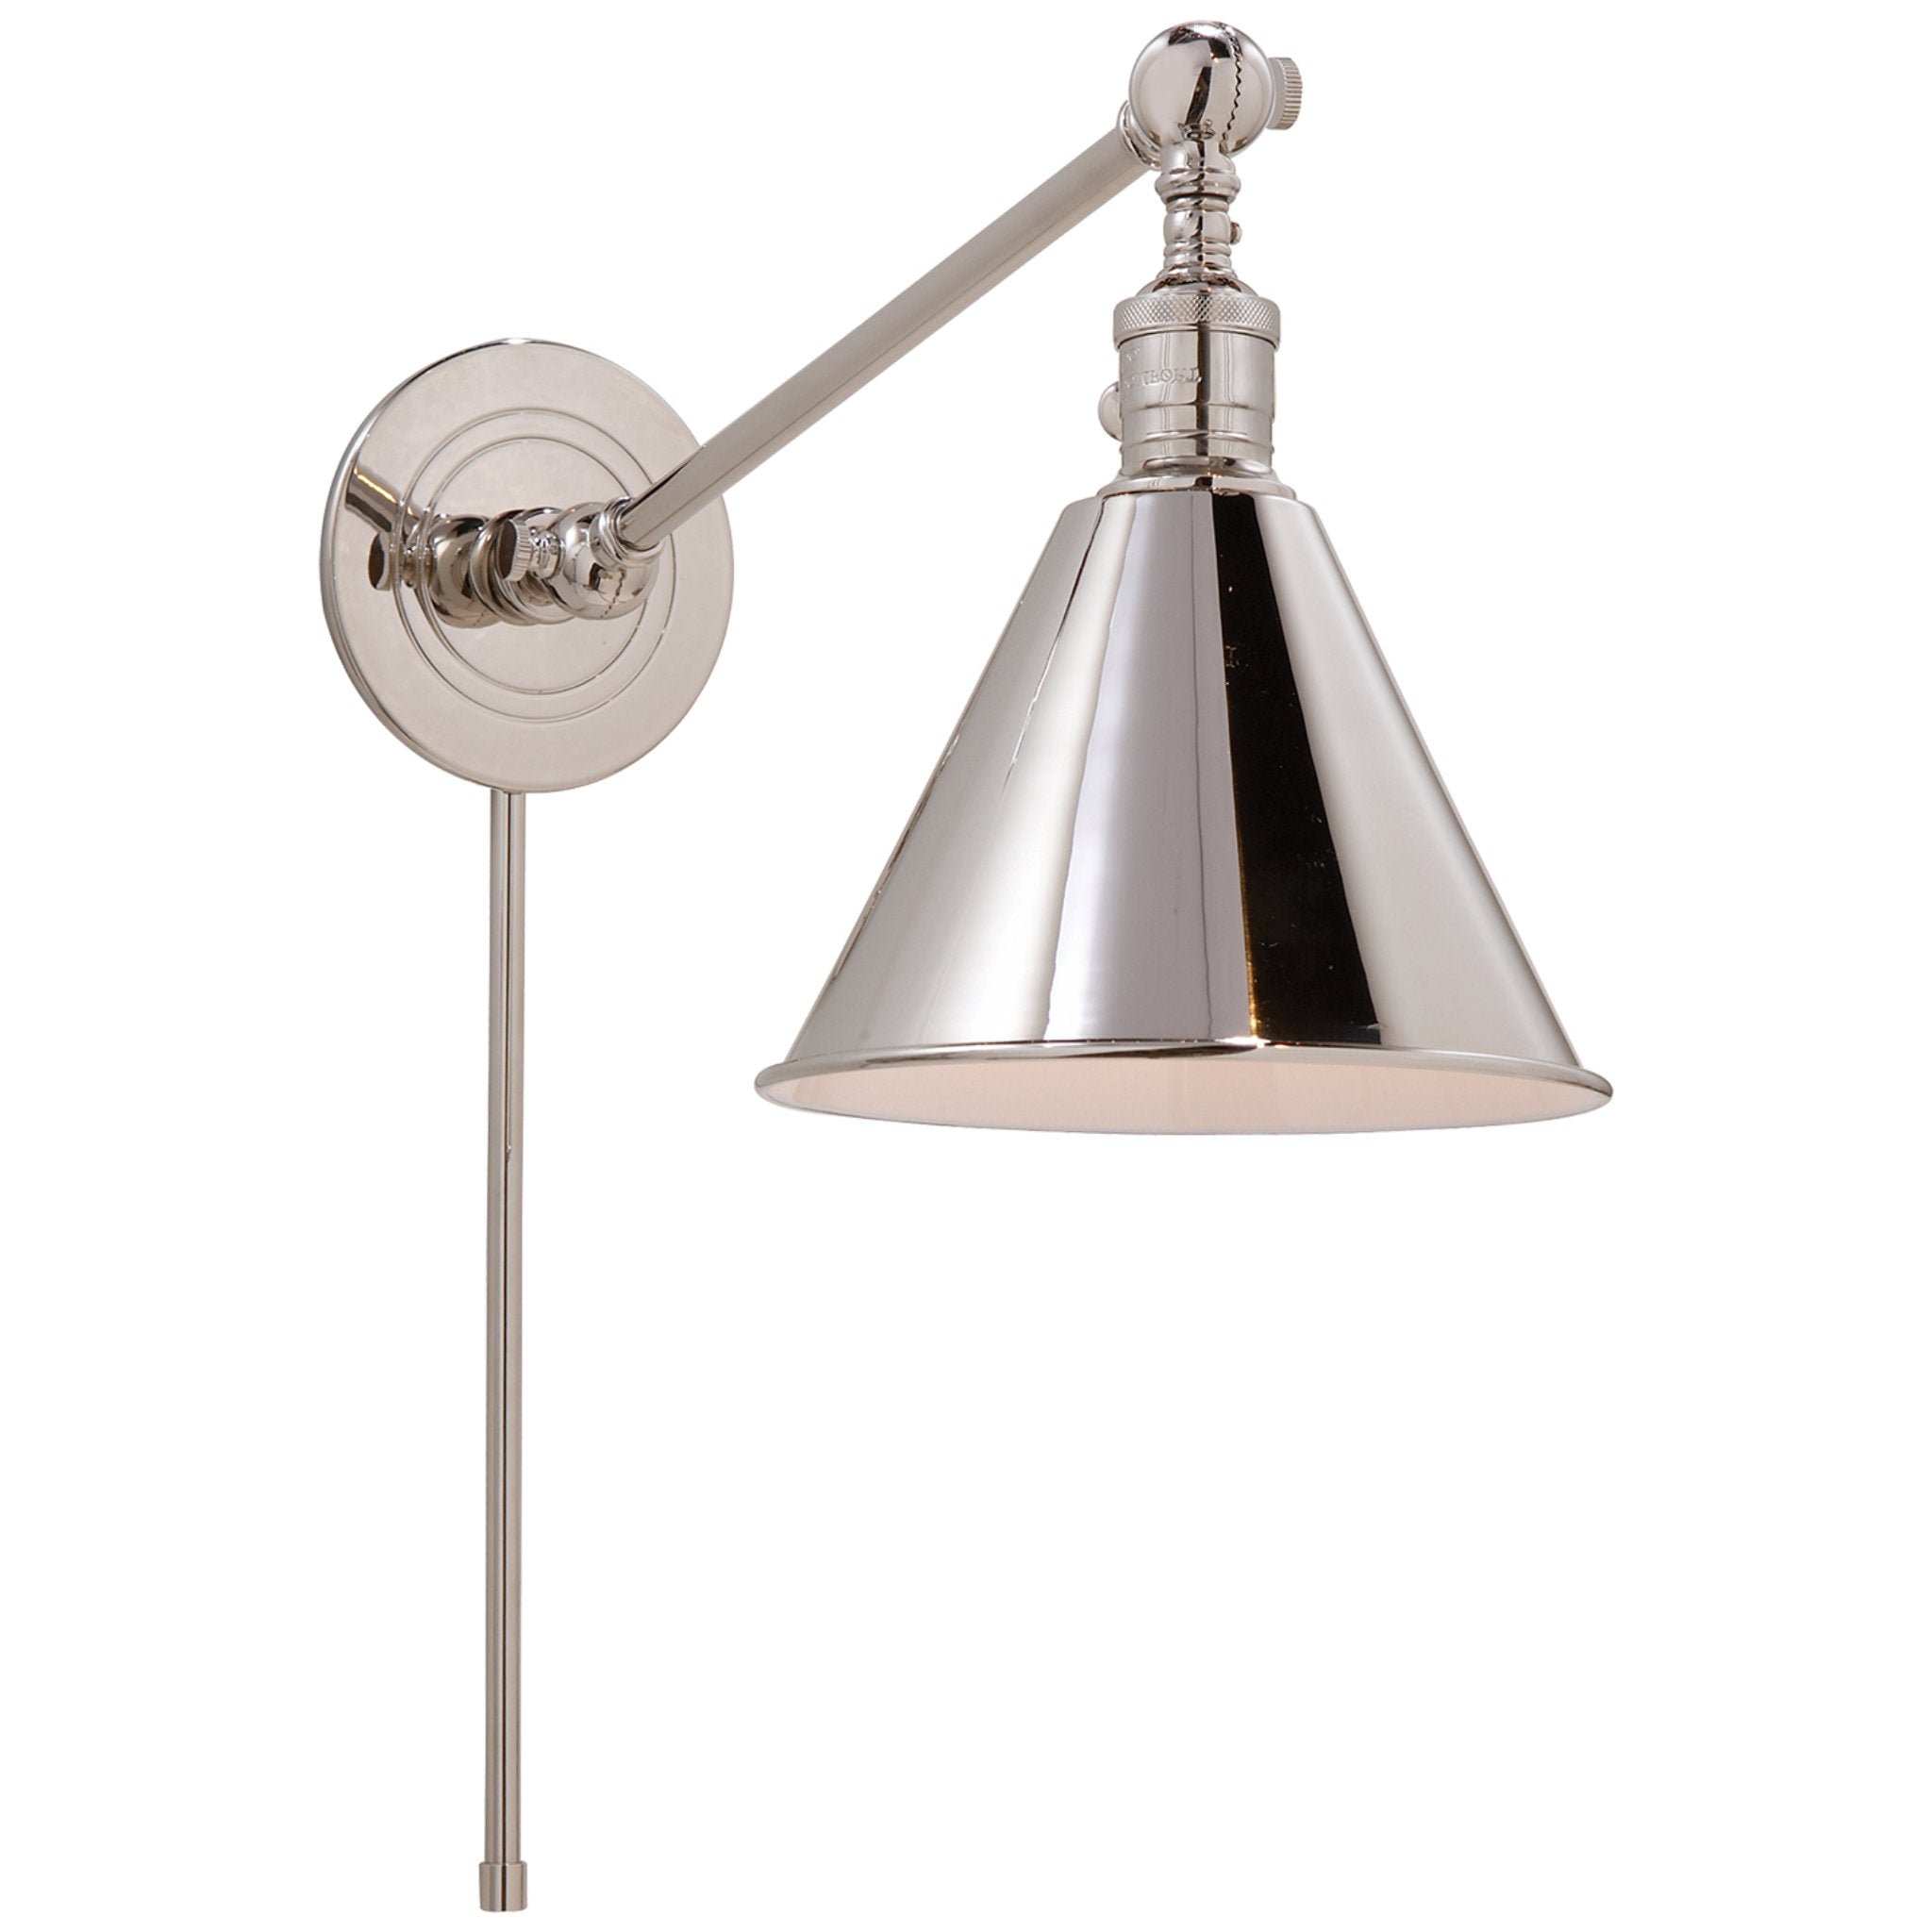 Chapman & Myers Boston Functional Single Arm Library Light in Polished